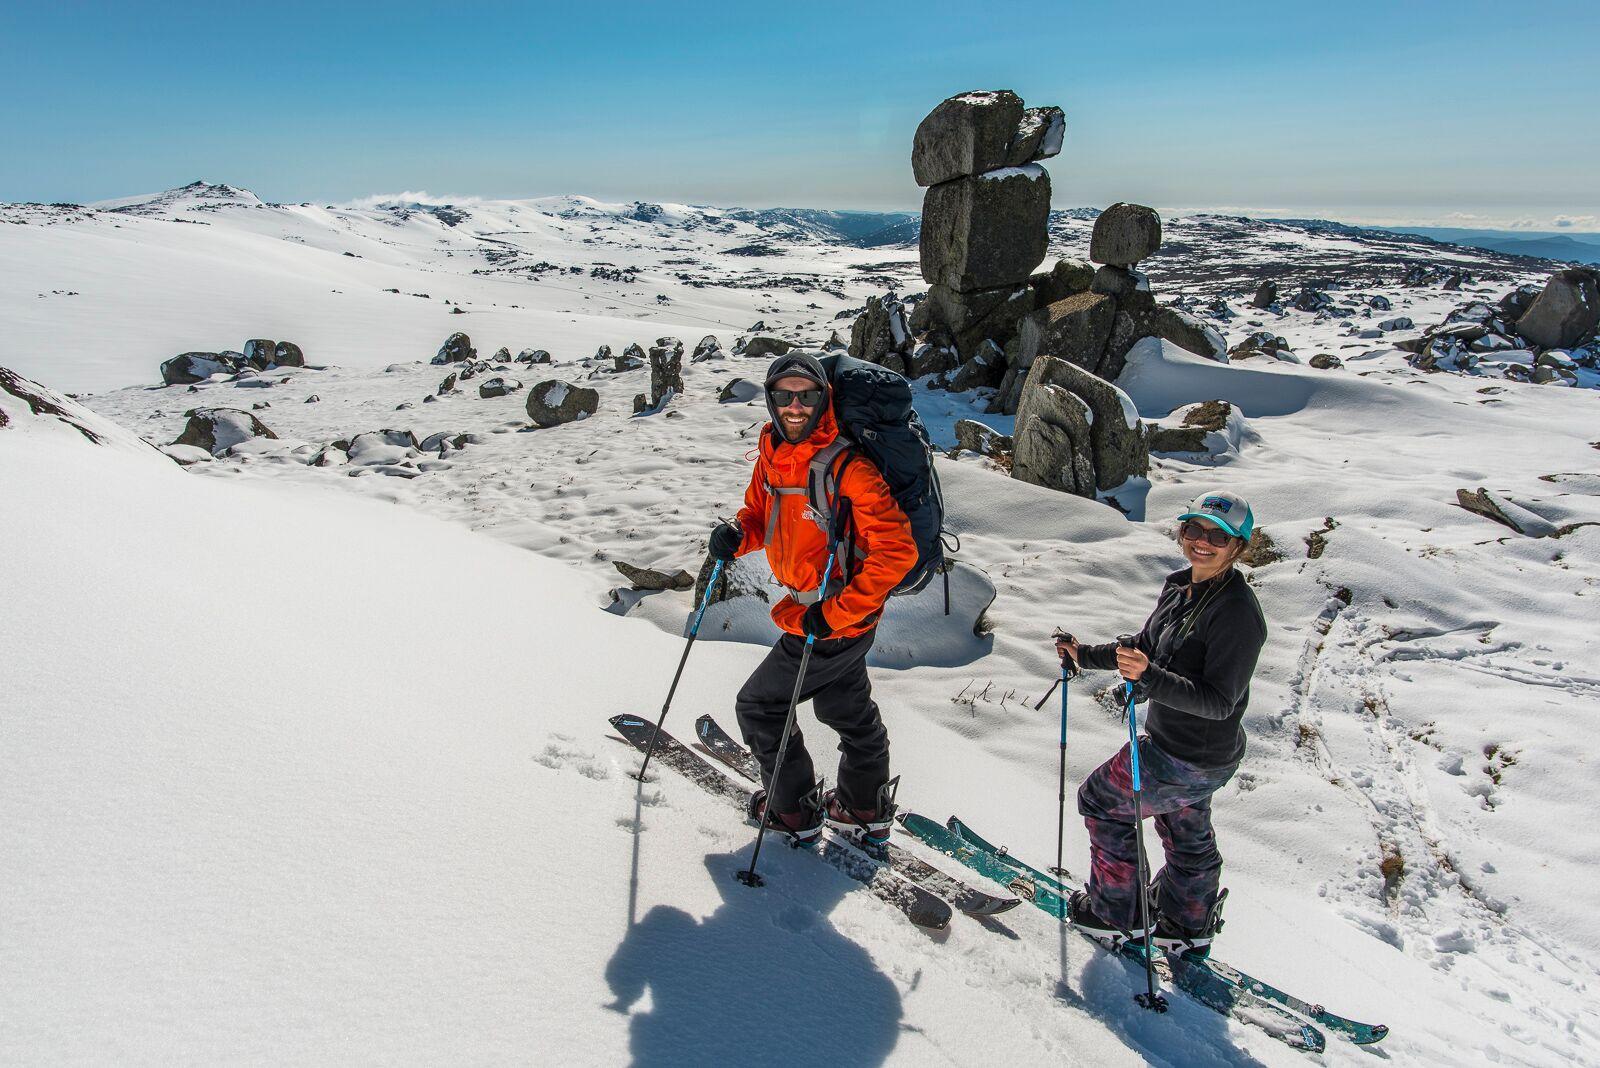 Nina and Ed hiked to the summit of Australia's highest peak - then snowboarded down it